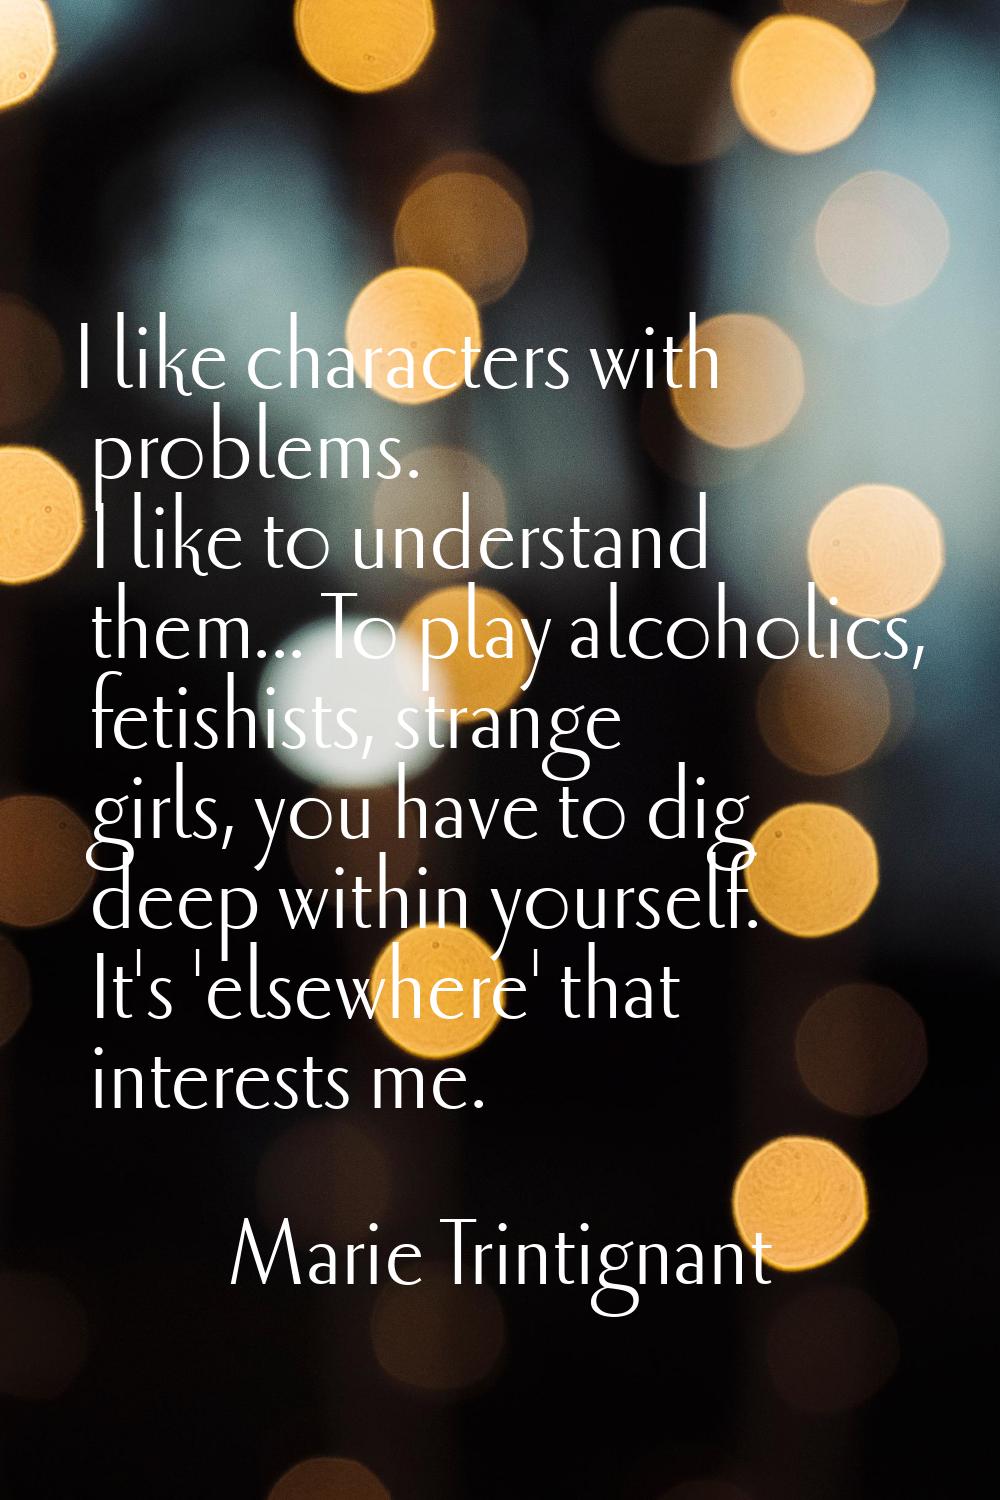 I like characters with problems. I like to understand them... To play alcoholics, fetishists, stran